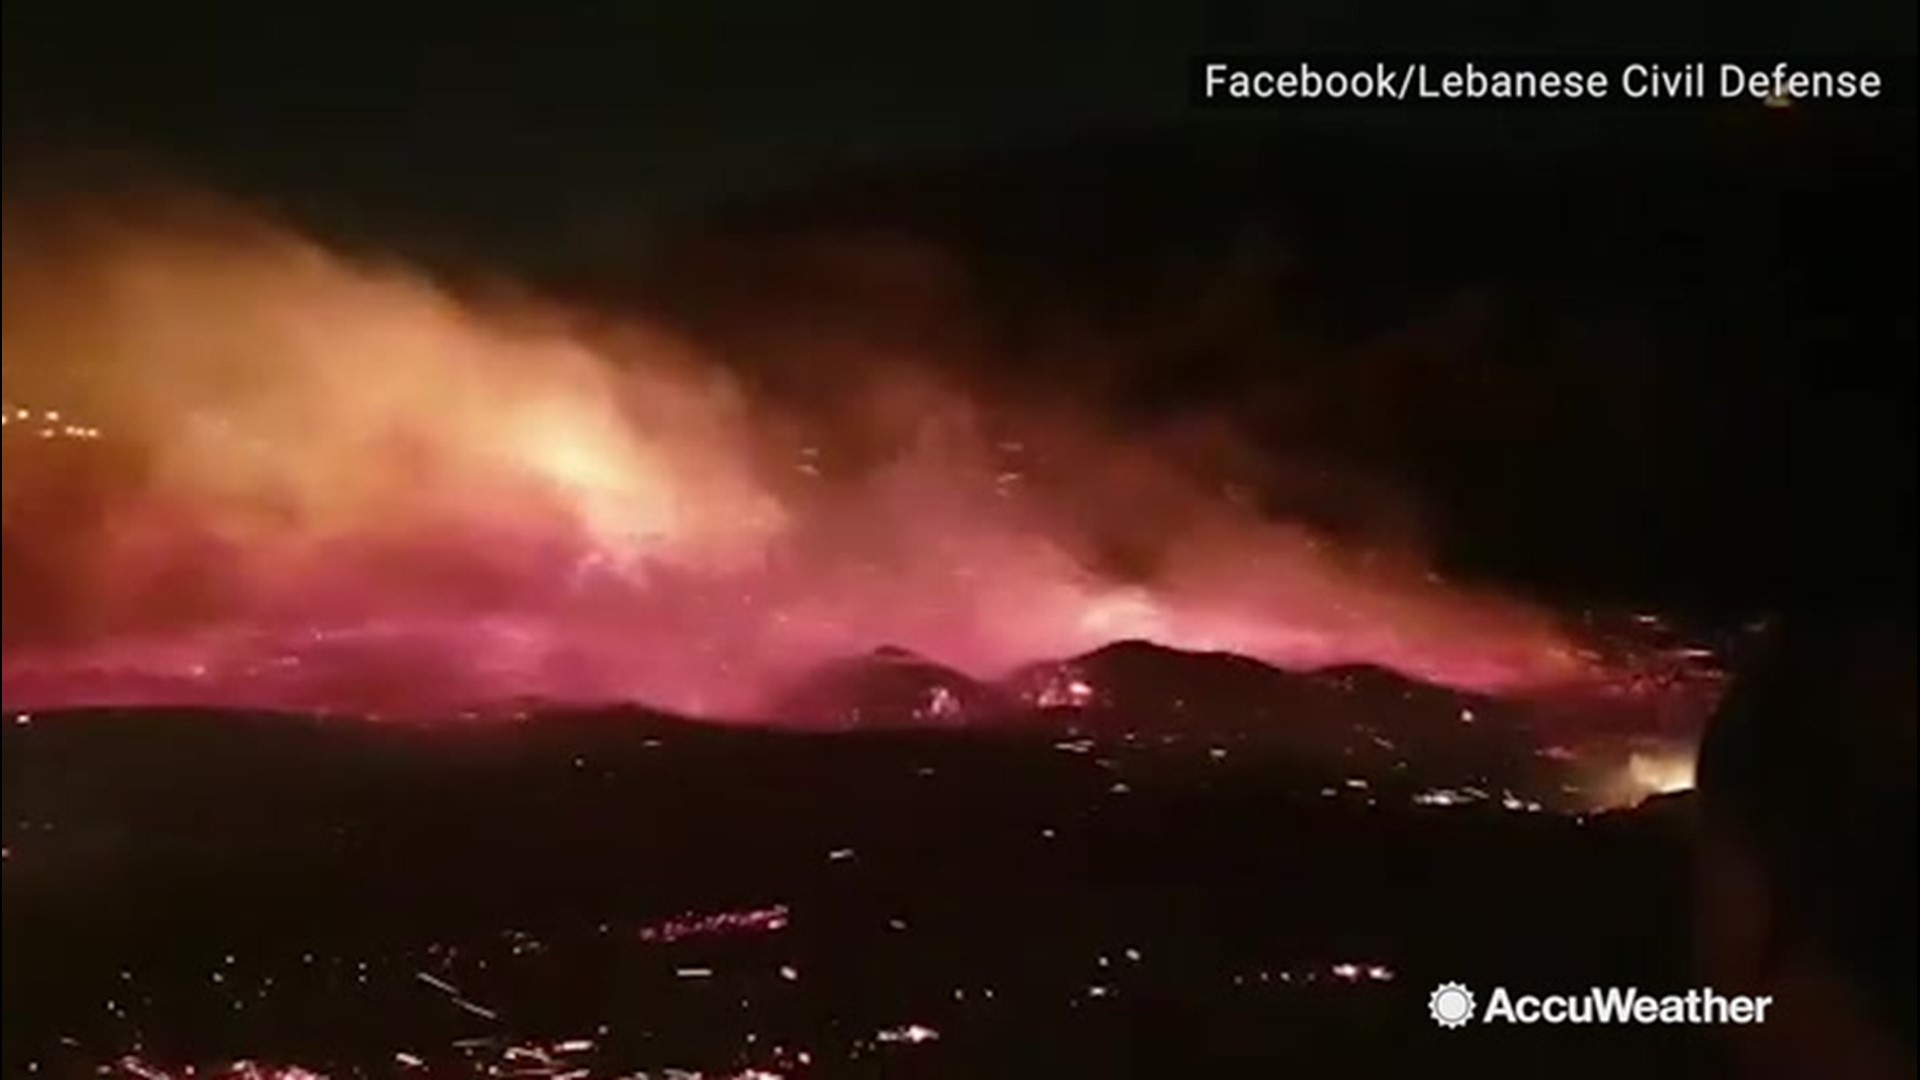 At least 18 people have been injured and dozens more have been given first aid as fierce wildfires rage through Lebanon's Mount Lebanon mountain range. The fires are said to be some of the worst the region has scene in decades.